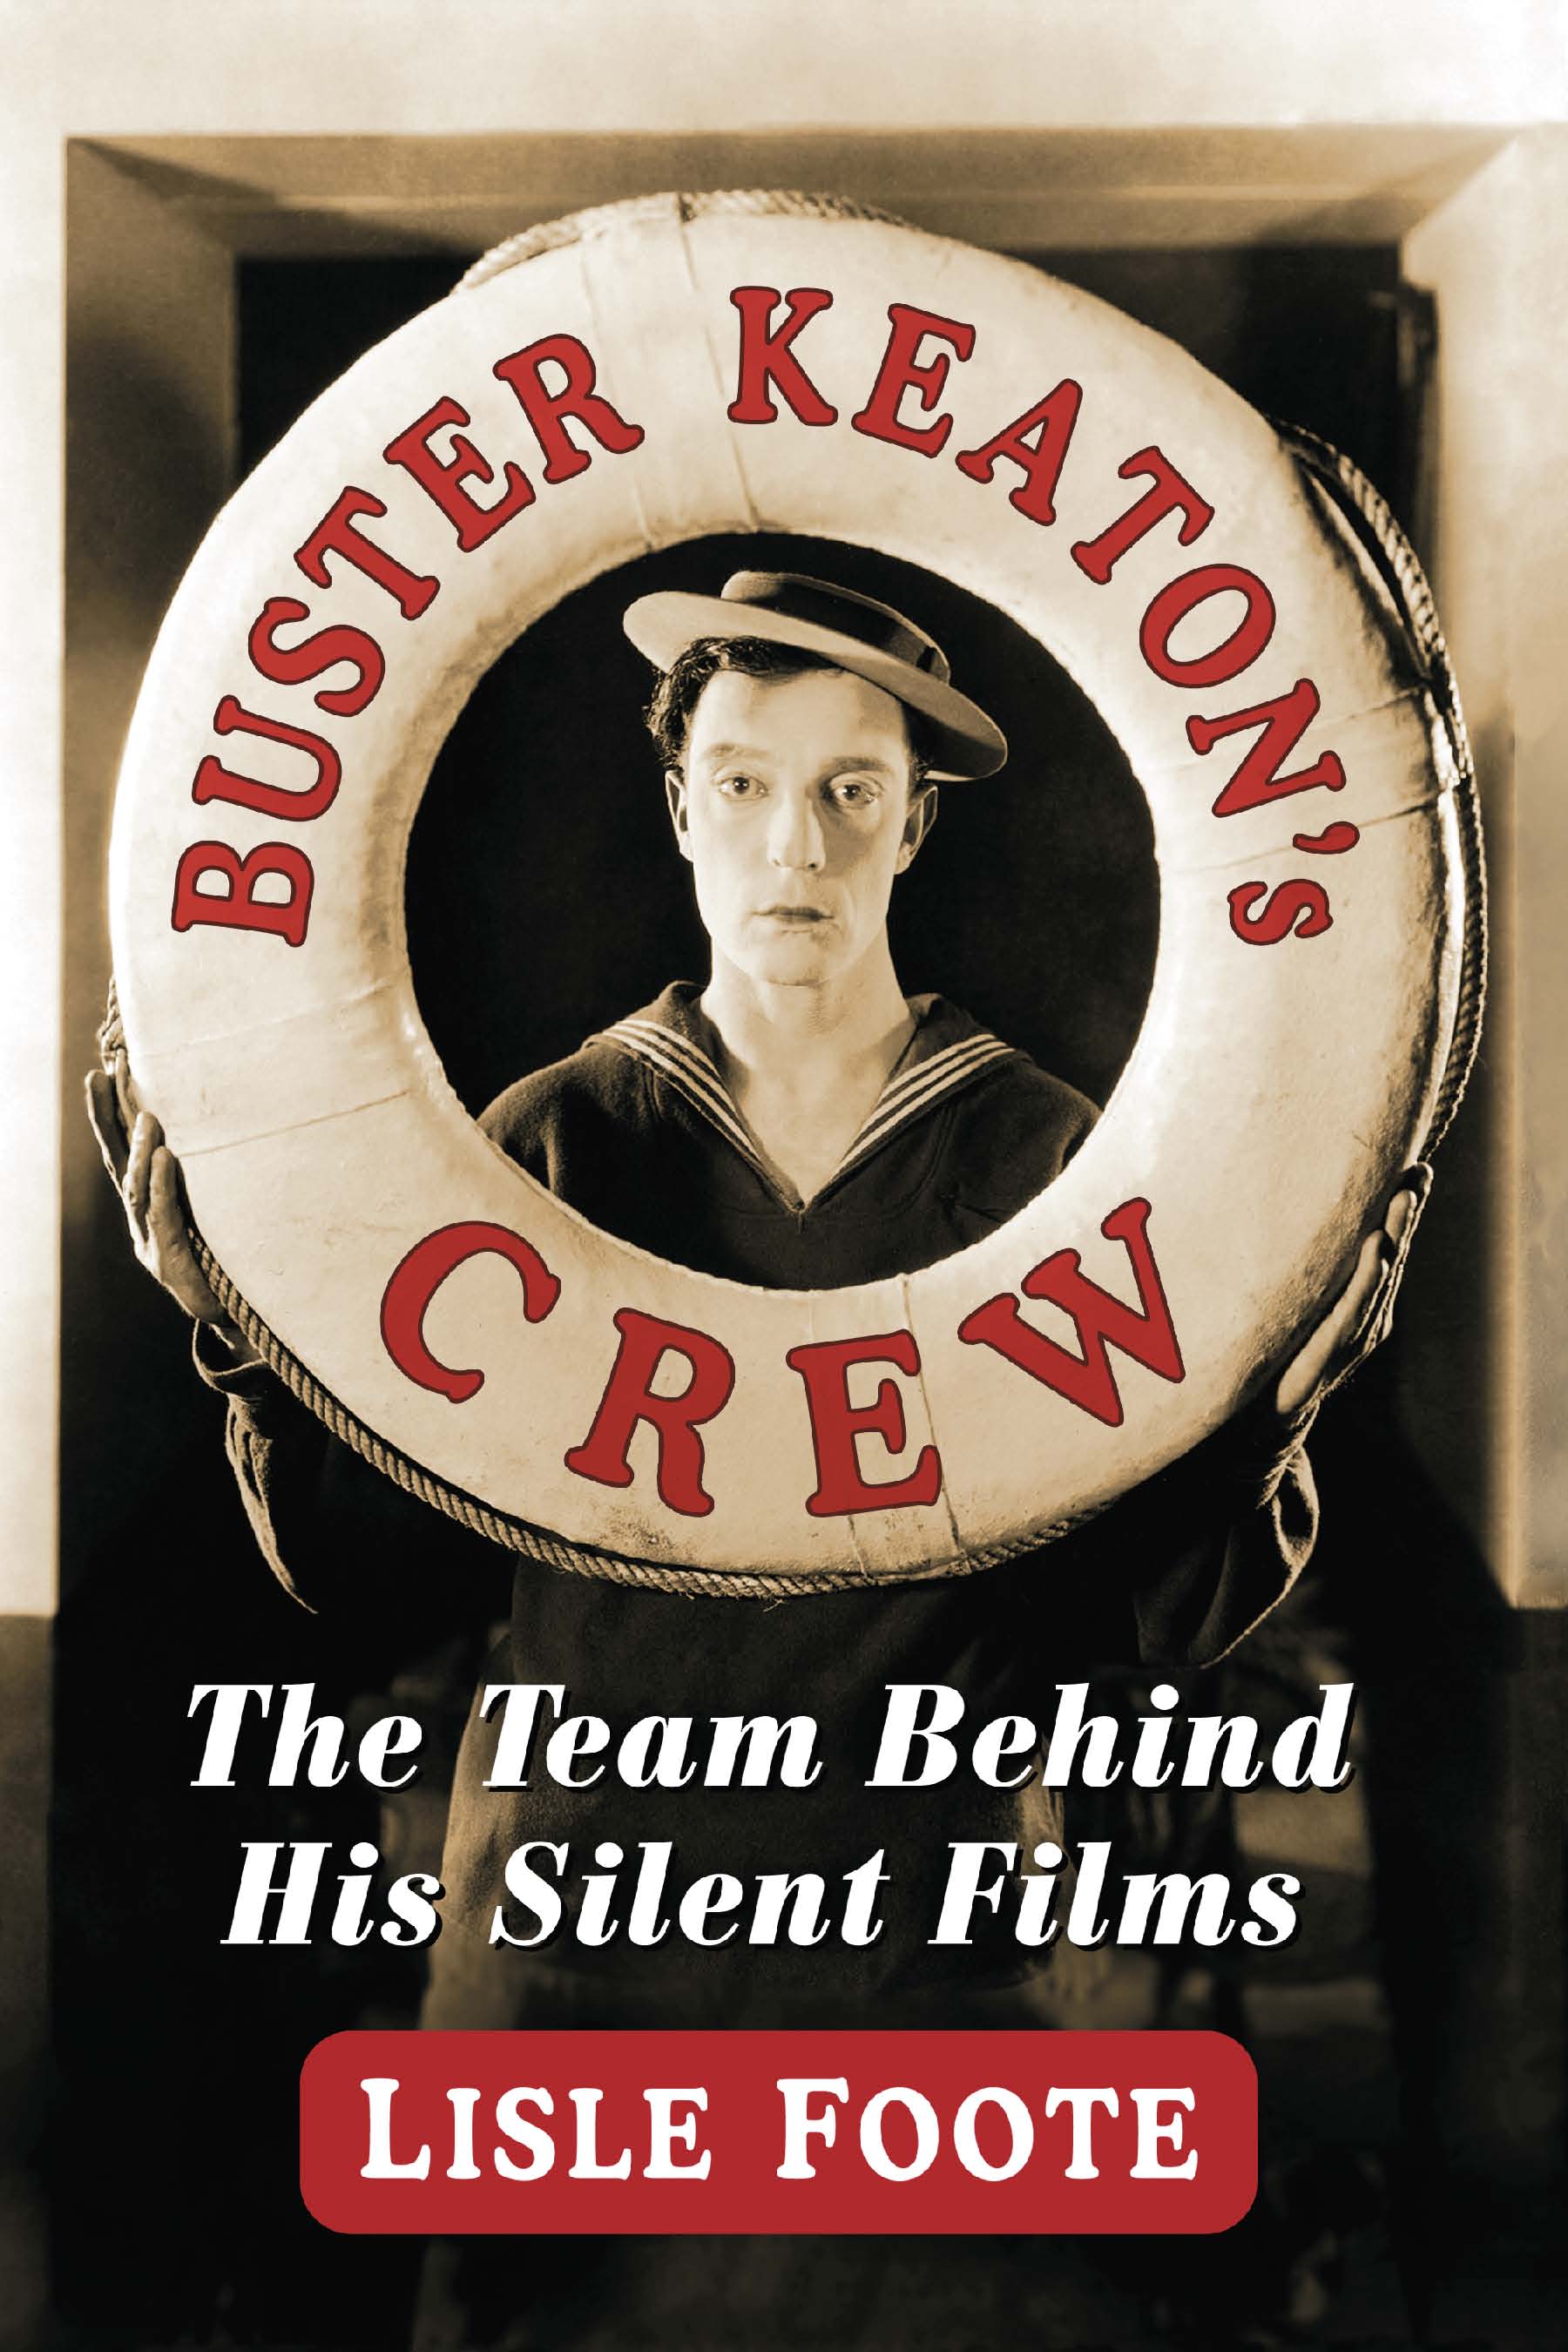 Buster Keatons Crew The Team Behind His Silent Films - image 1